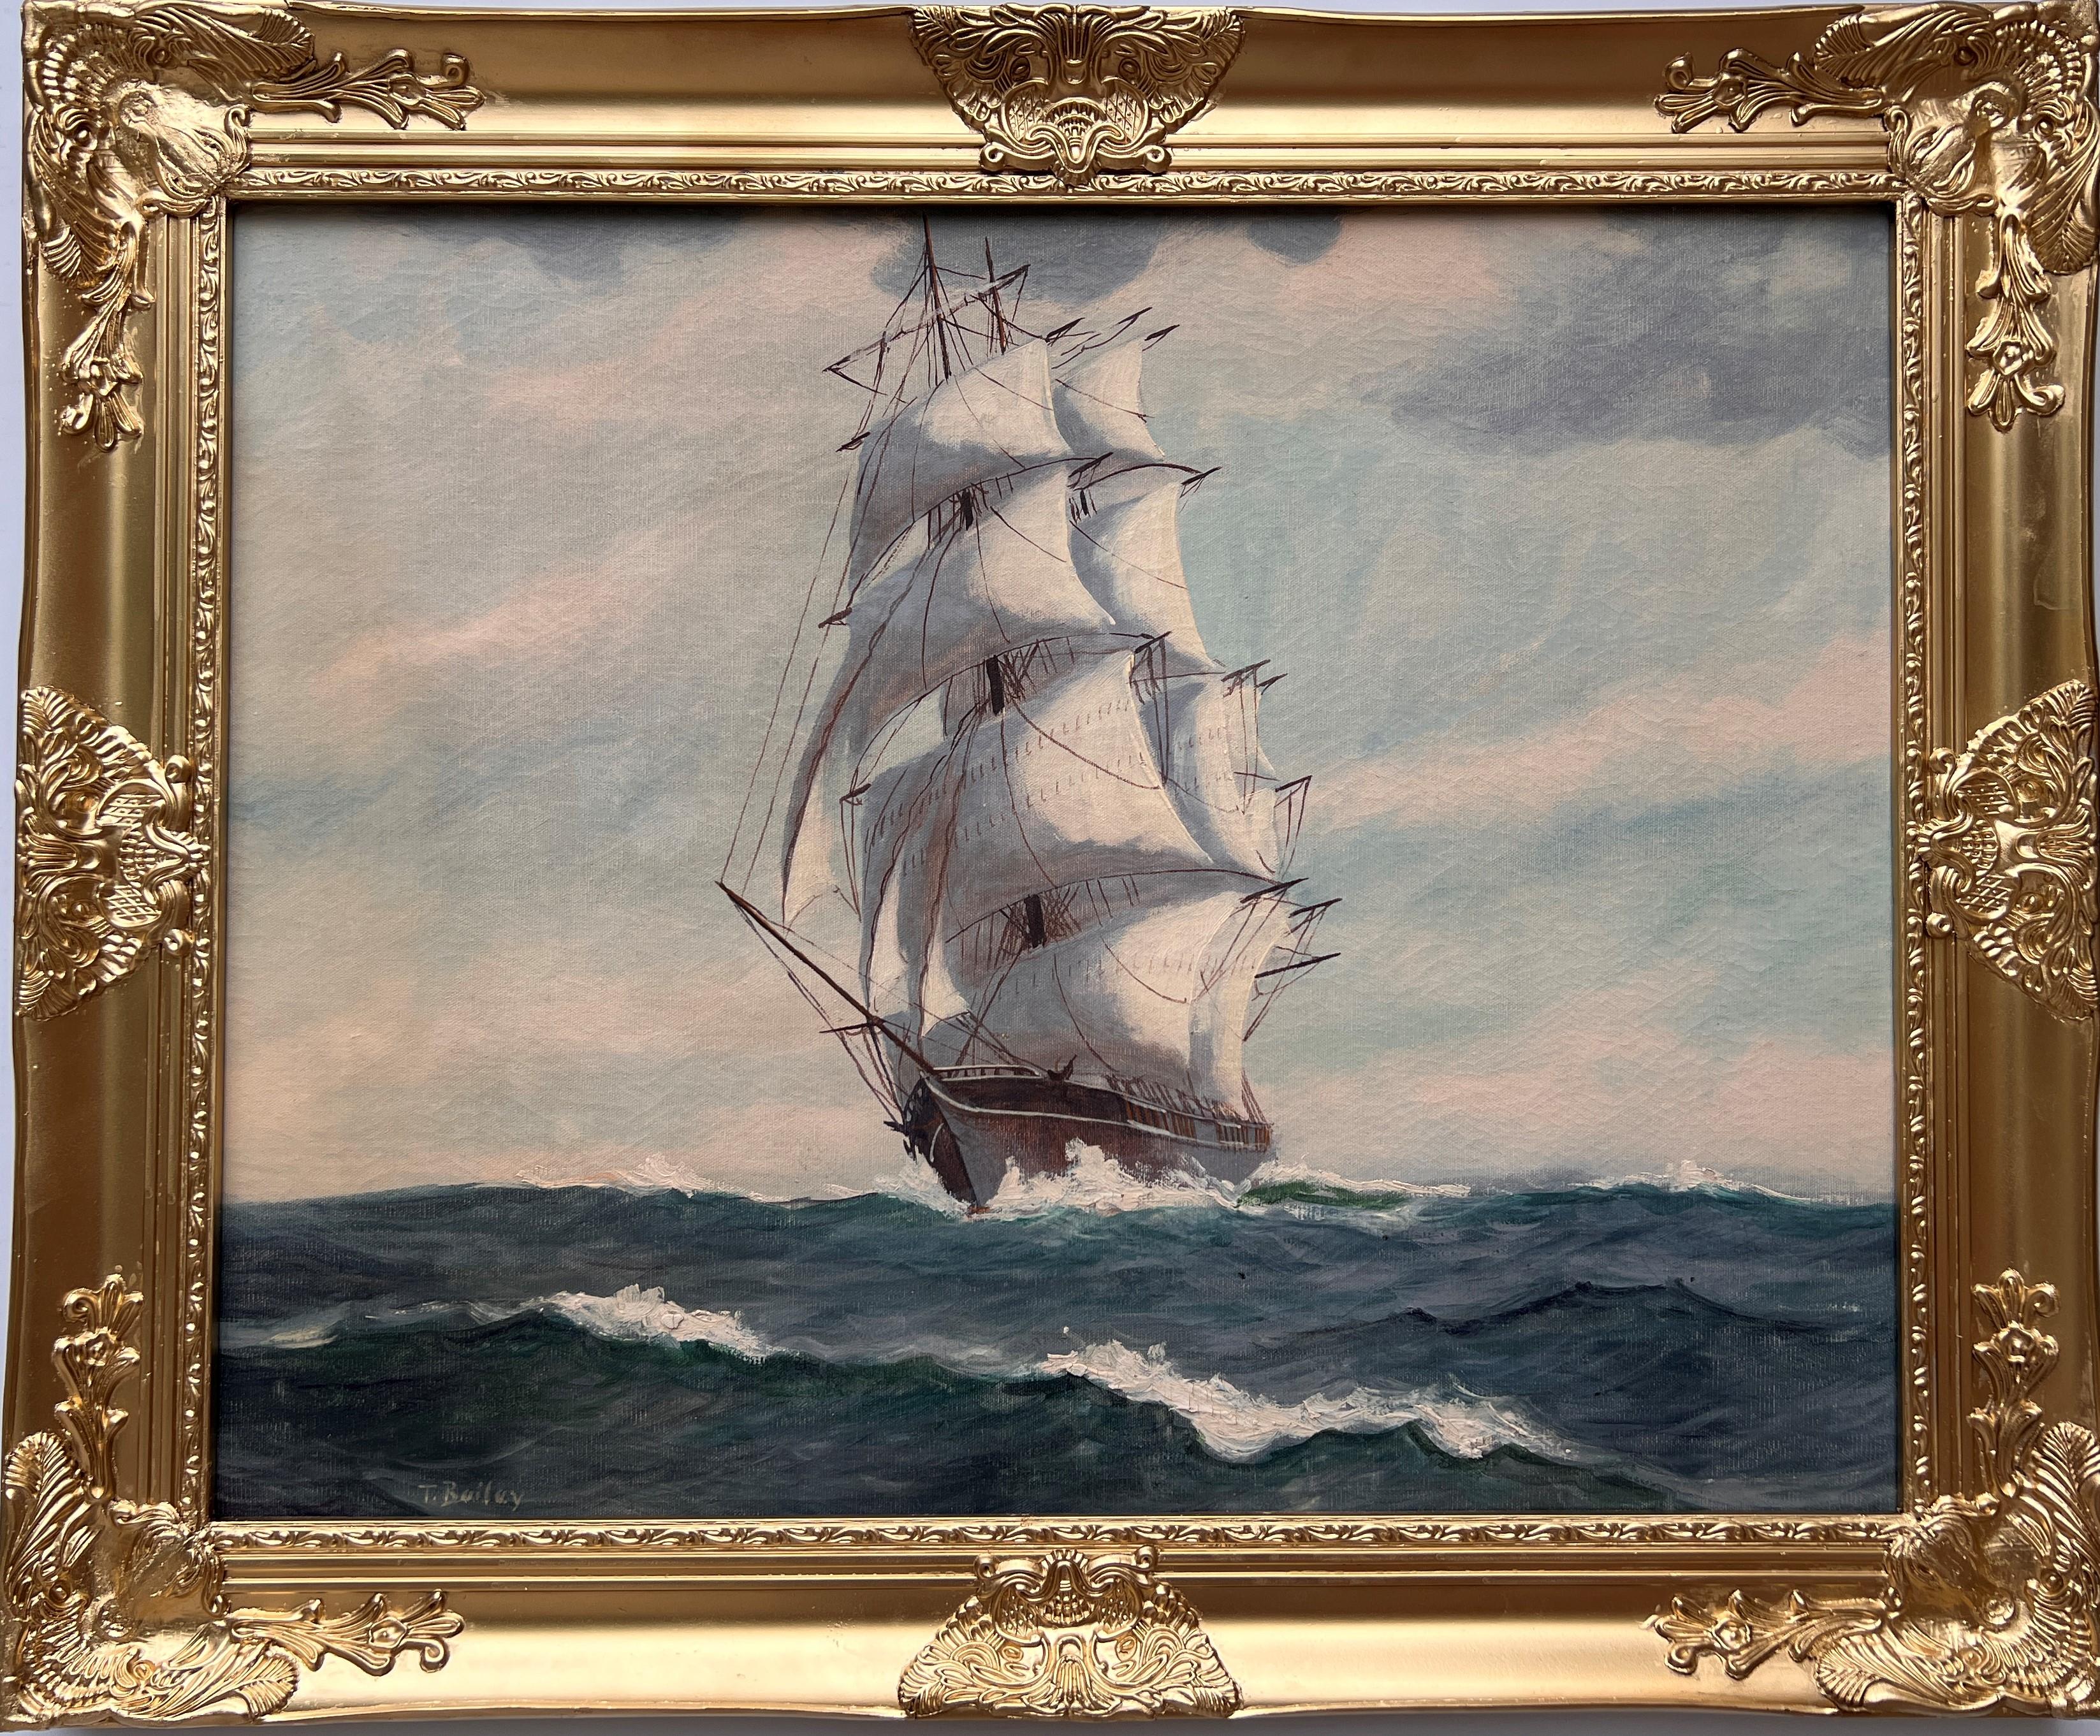 T. Bailey Landscape Painting - Large Antique T. BAILEY Original Oil Painting on canvas Ship on the Ocean